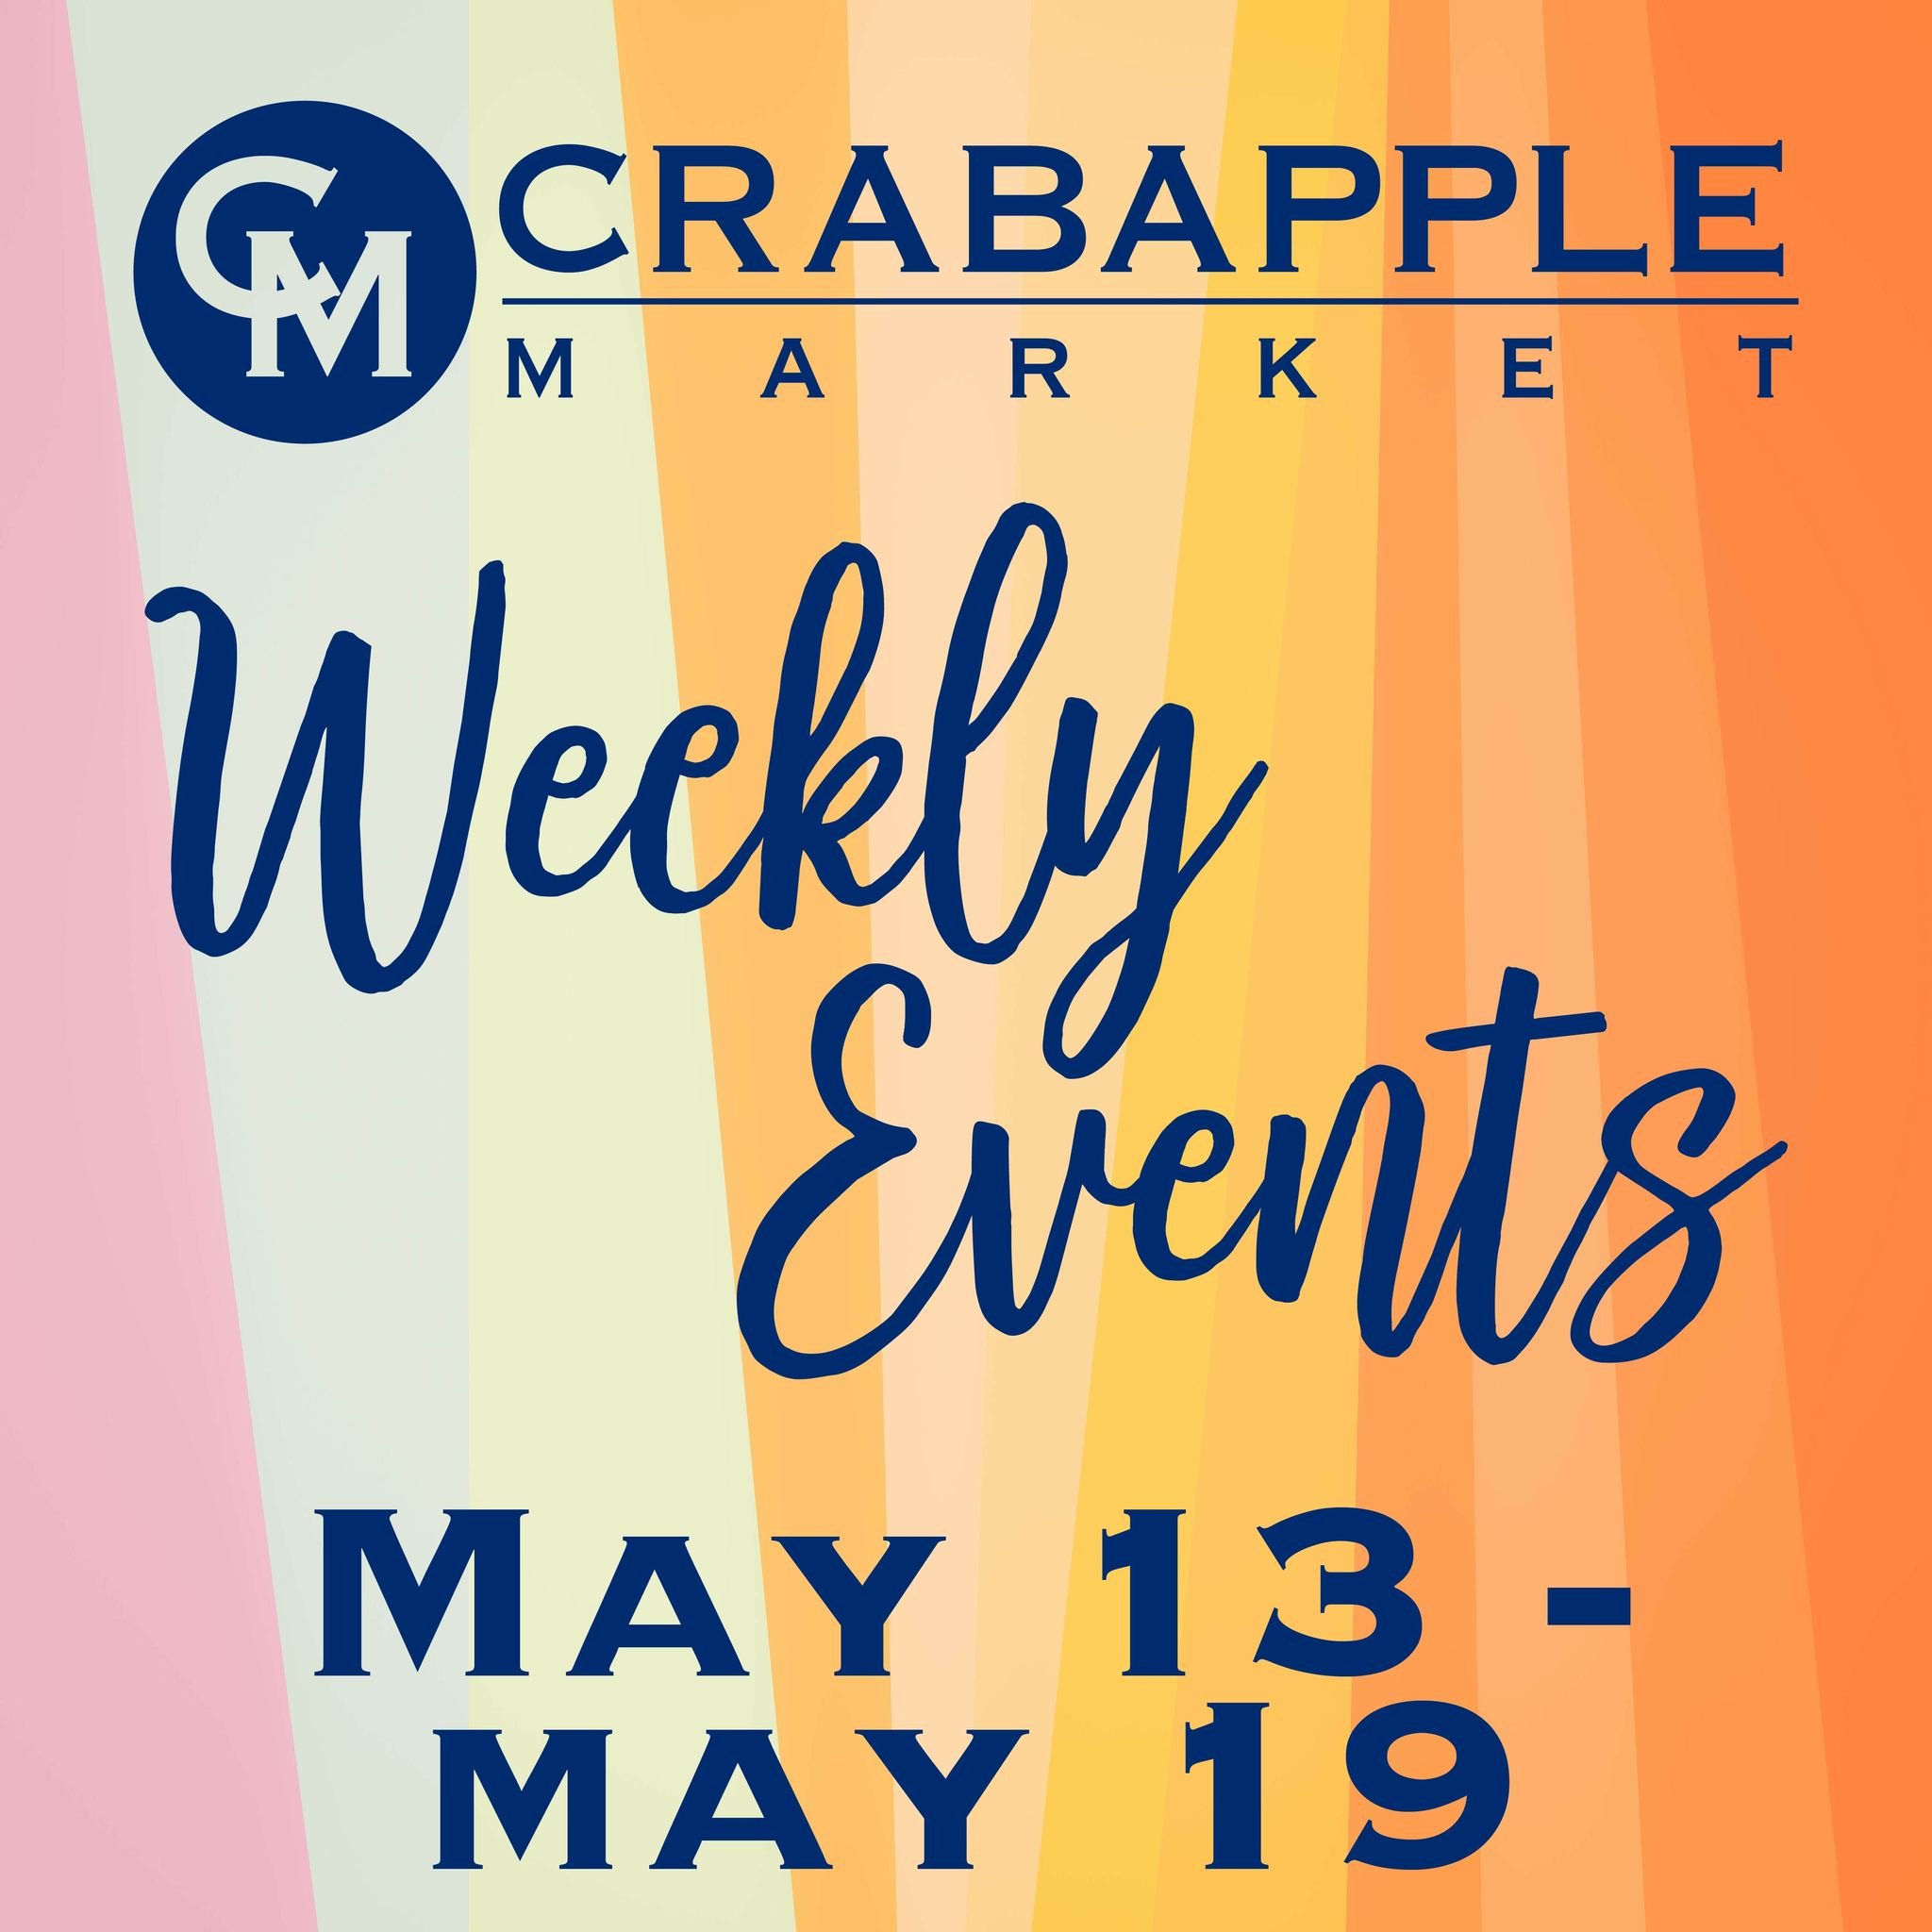 Check out the line up and make time⏰for fun &amp; free events this week at Crabapple market! 
FREE Events on #TheGreen 
Tonight: The Punchline Comedy Night 7:30 - 9PM 
Wednesday: Picnic on The Green 6 - 8PM
Saturday: LiveLOUD Concert 80s theme with T